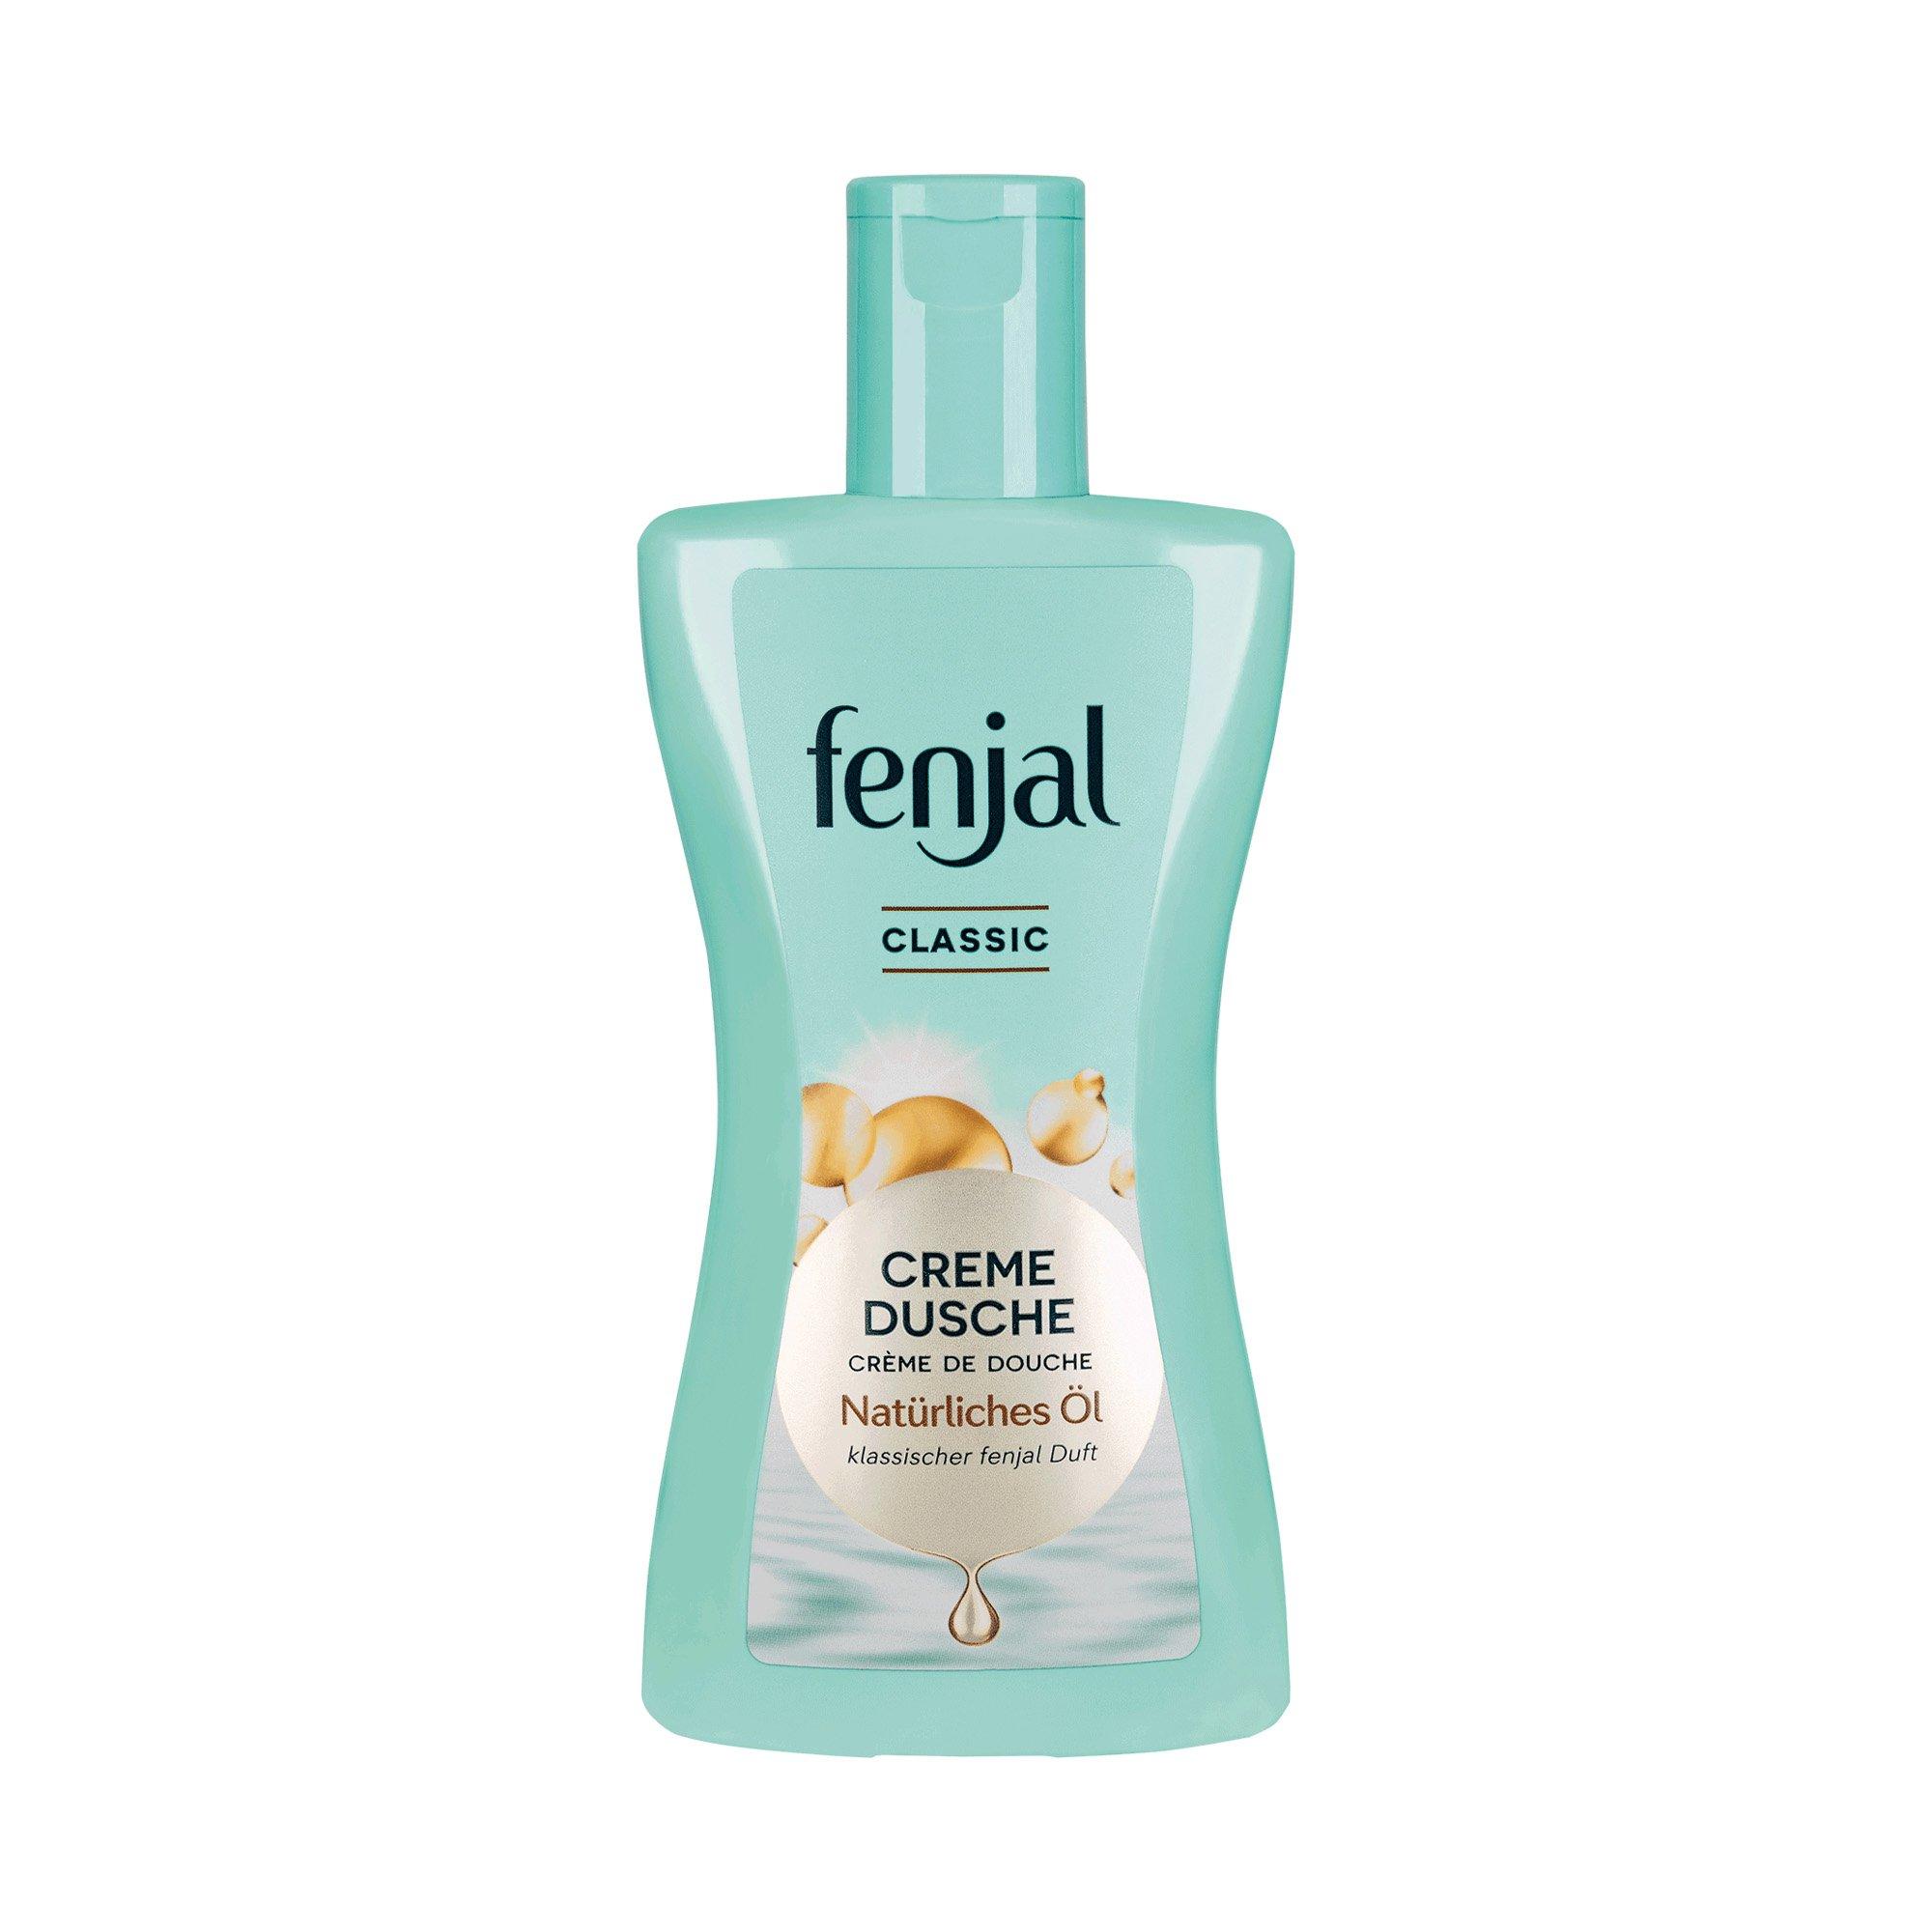 Image of fenjal Creme Dusche Classic - 200ml